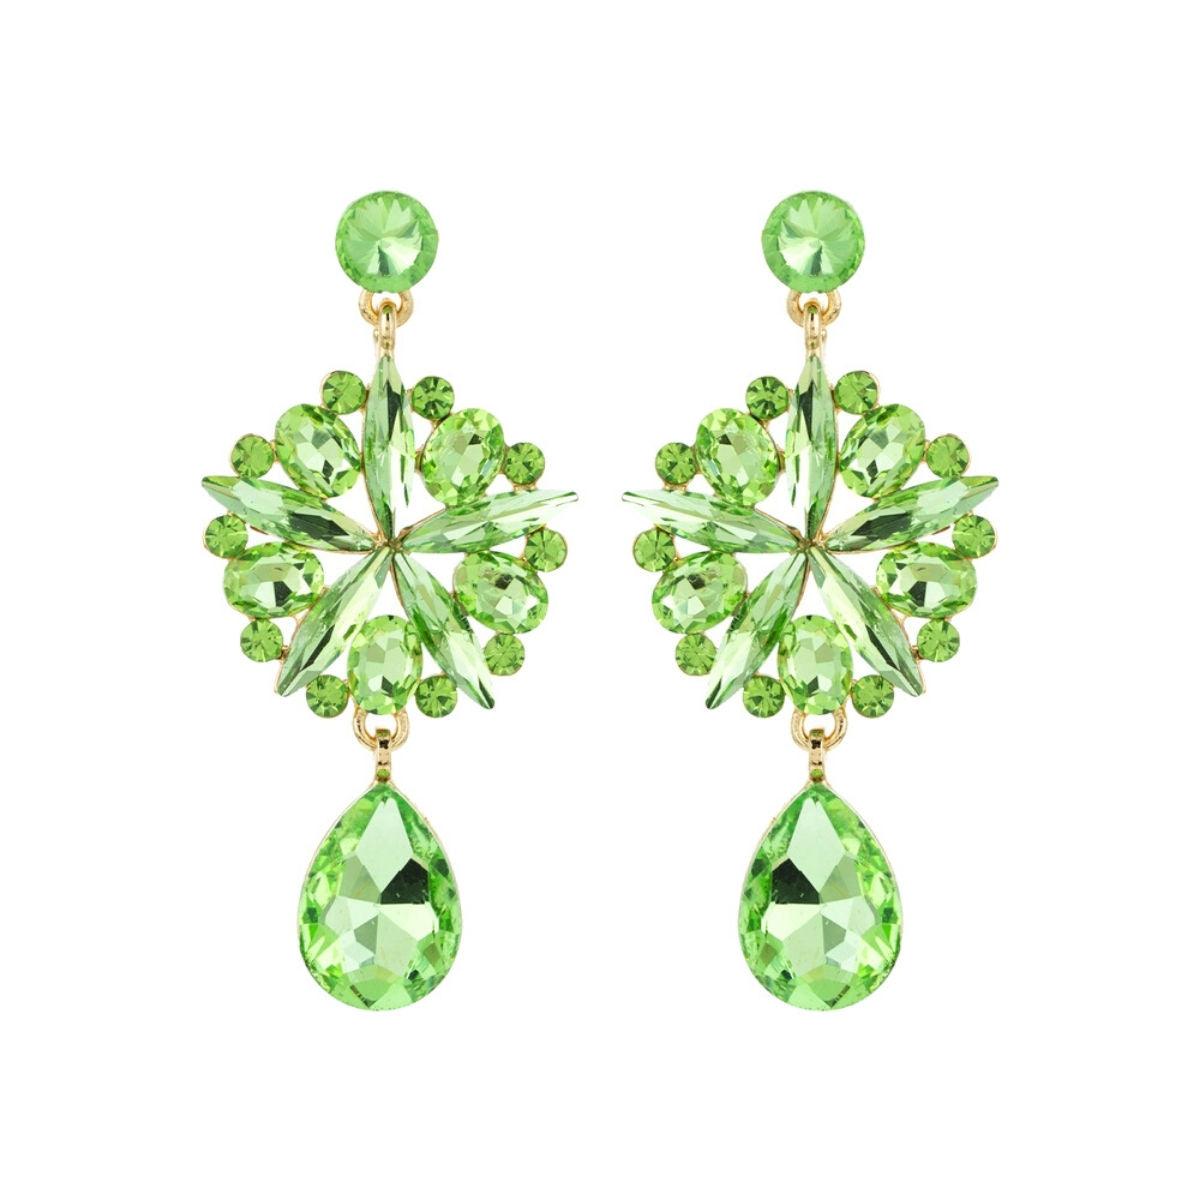 Eye-Catching Green Sparkle Earrings - Make a Statement